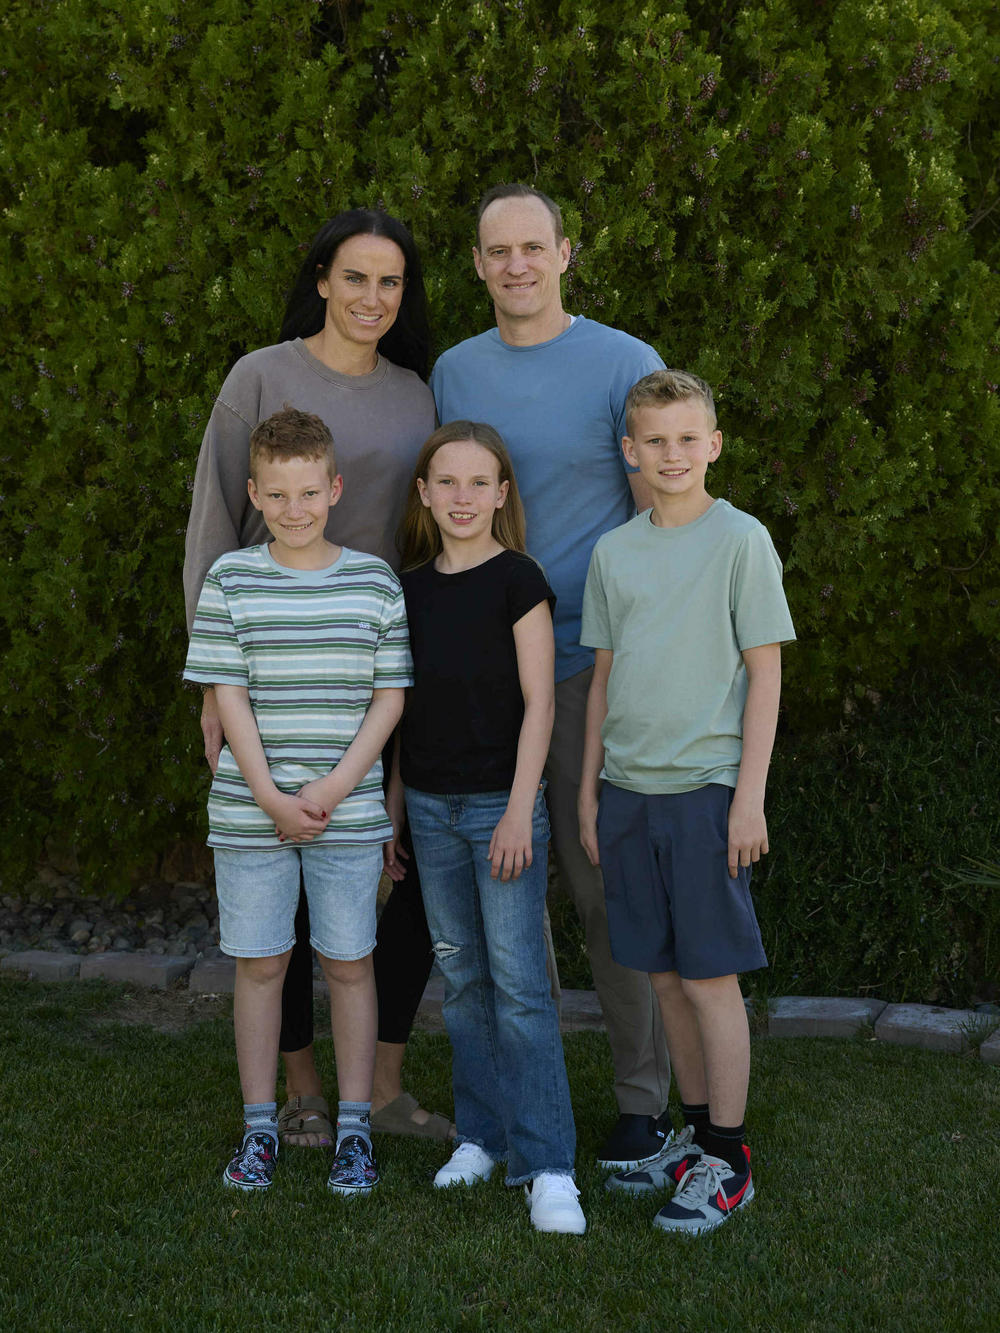 Members of the Hall family pose for a photo at their Las Vegas home: parents Hillary and Jeff and children Winston (from left), Maggie and Walker.